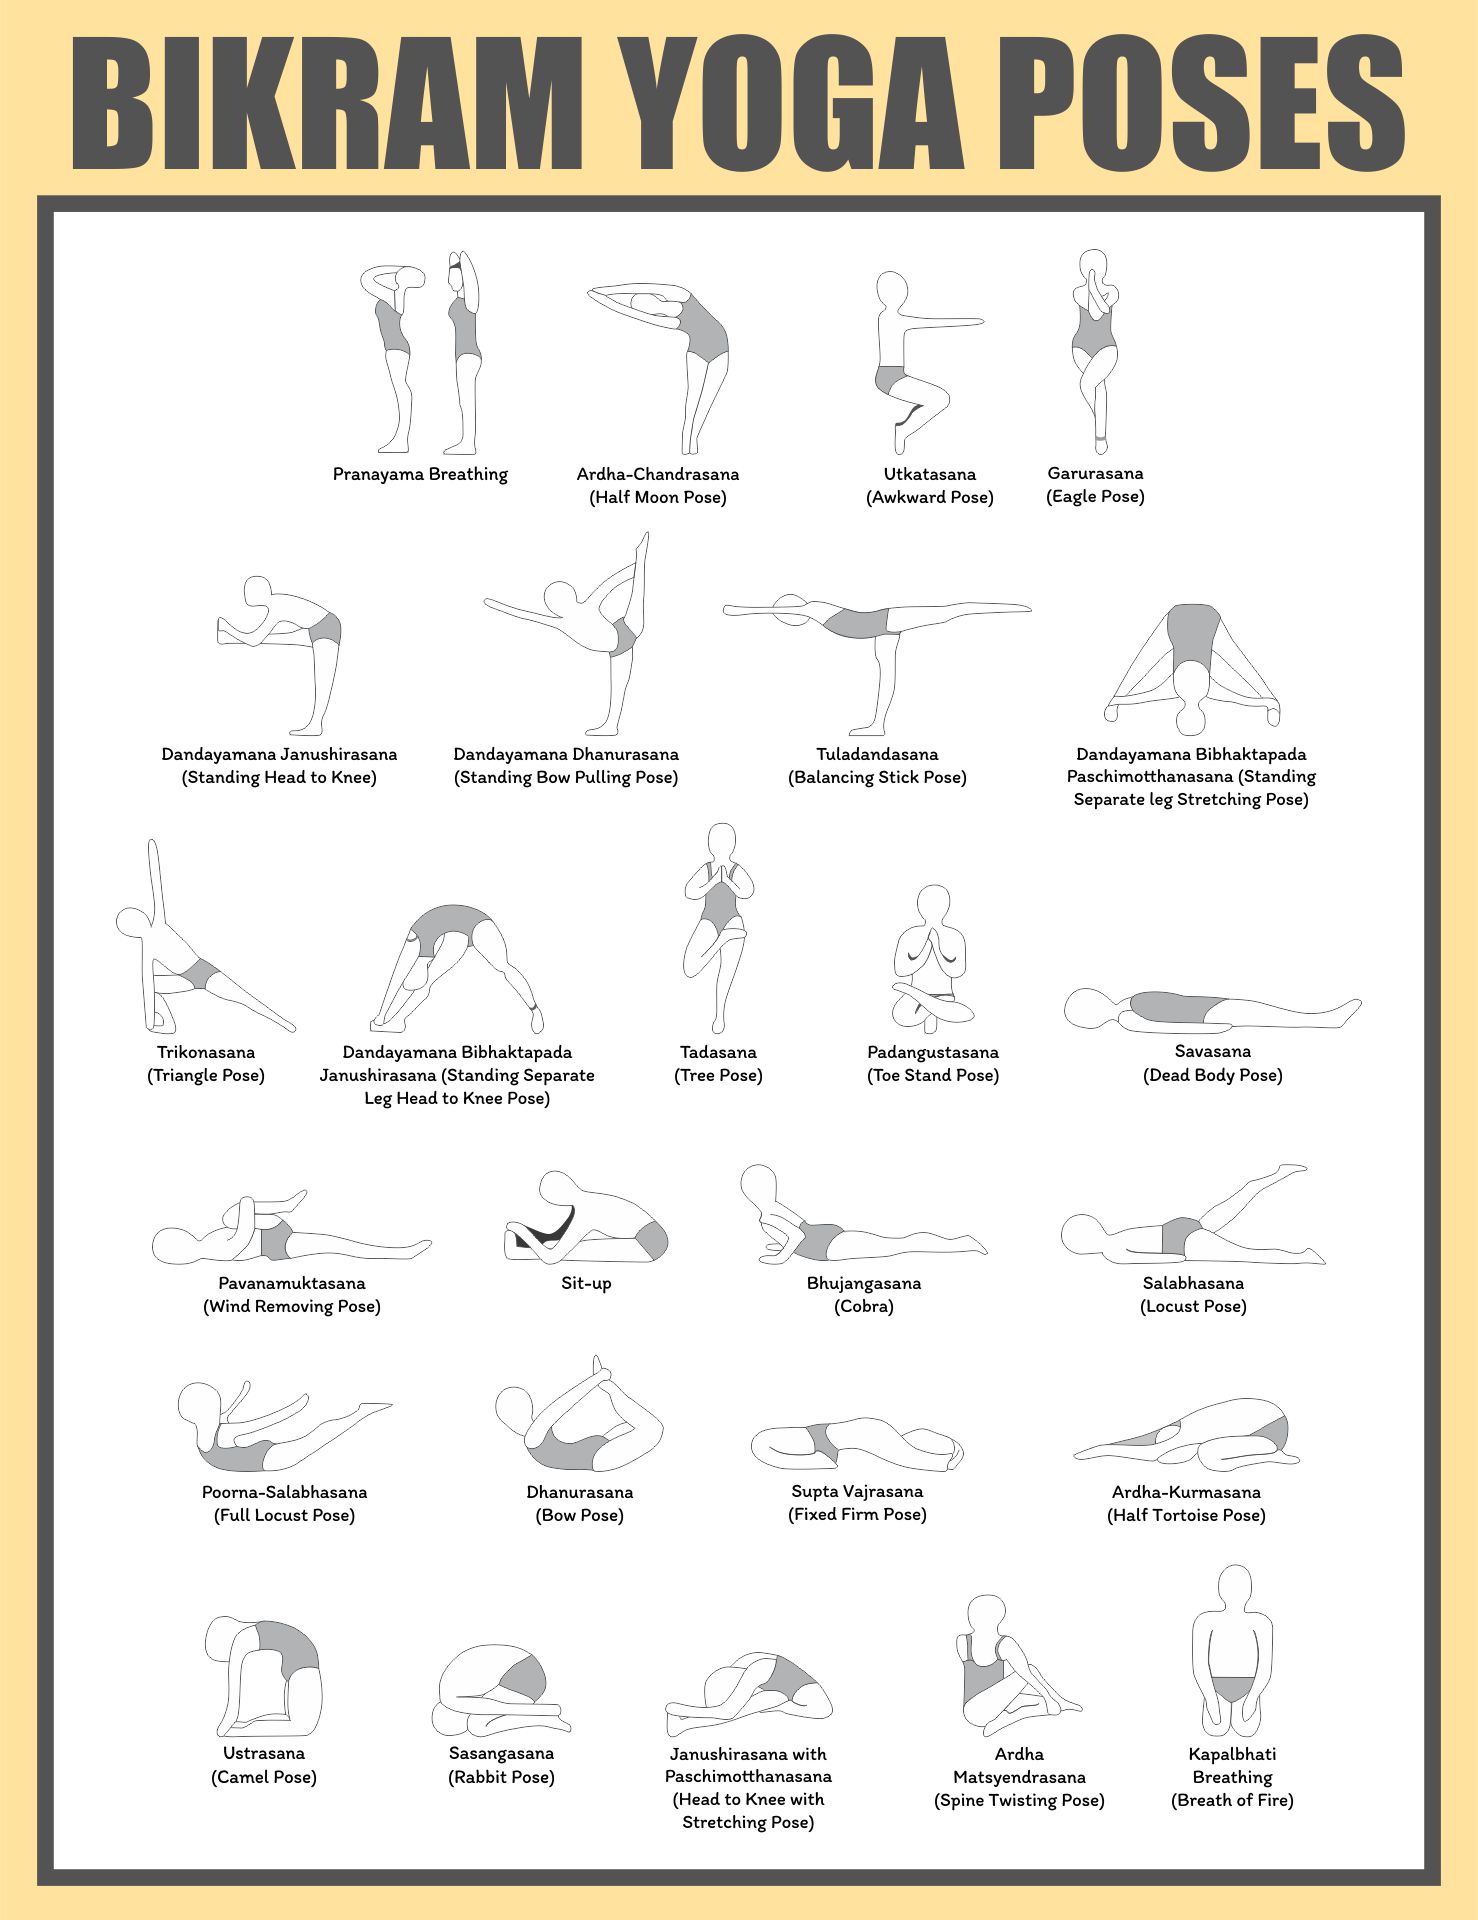 22 Animal yoga poses and their benefits for men, women & children | The Art  of Living India